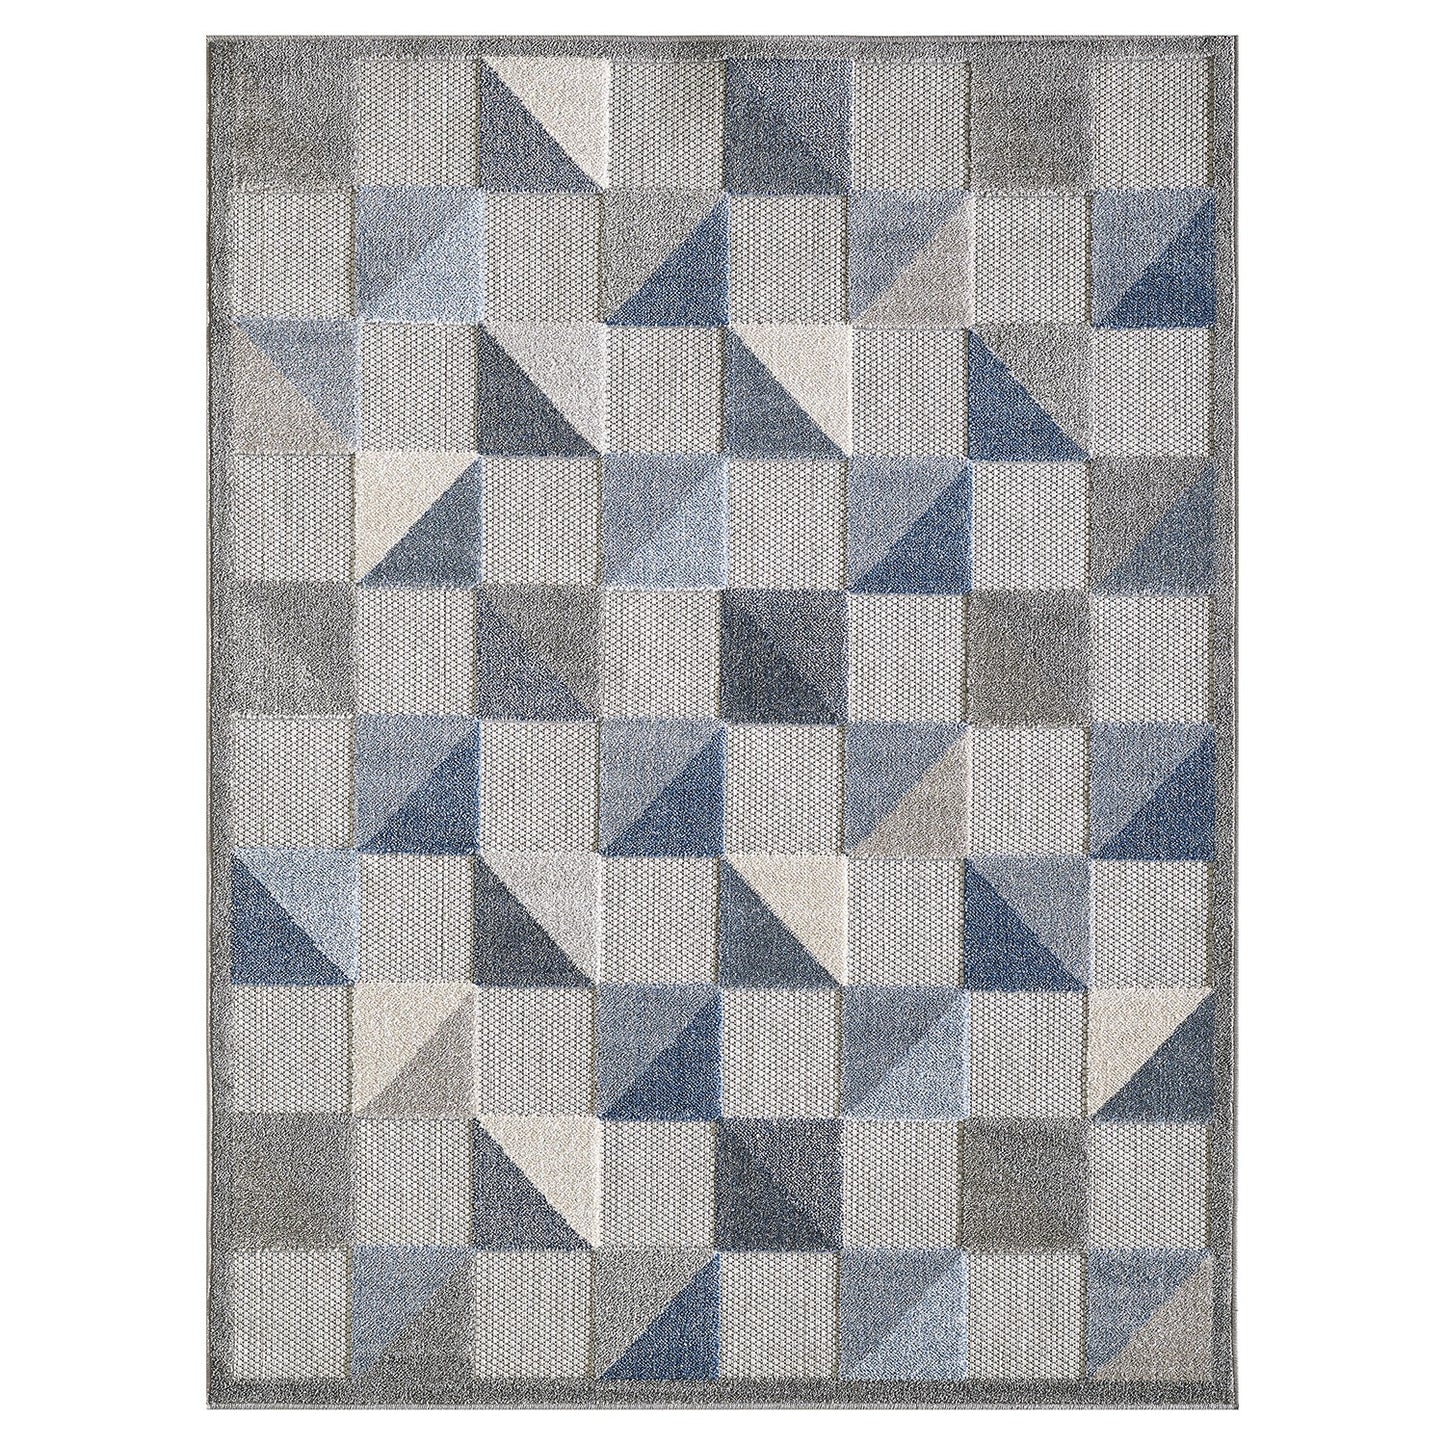 2' X 4' Blue And Gray Geometric Stain Resistant Indoor Outdoor Area Rug